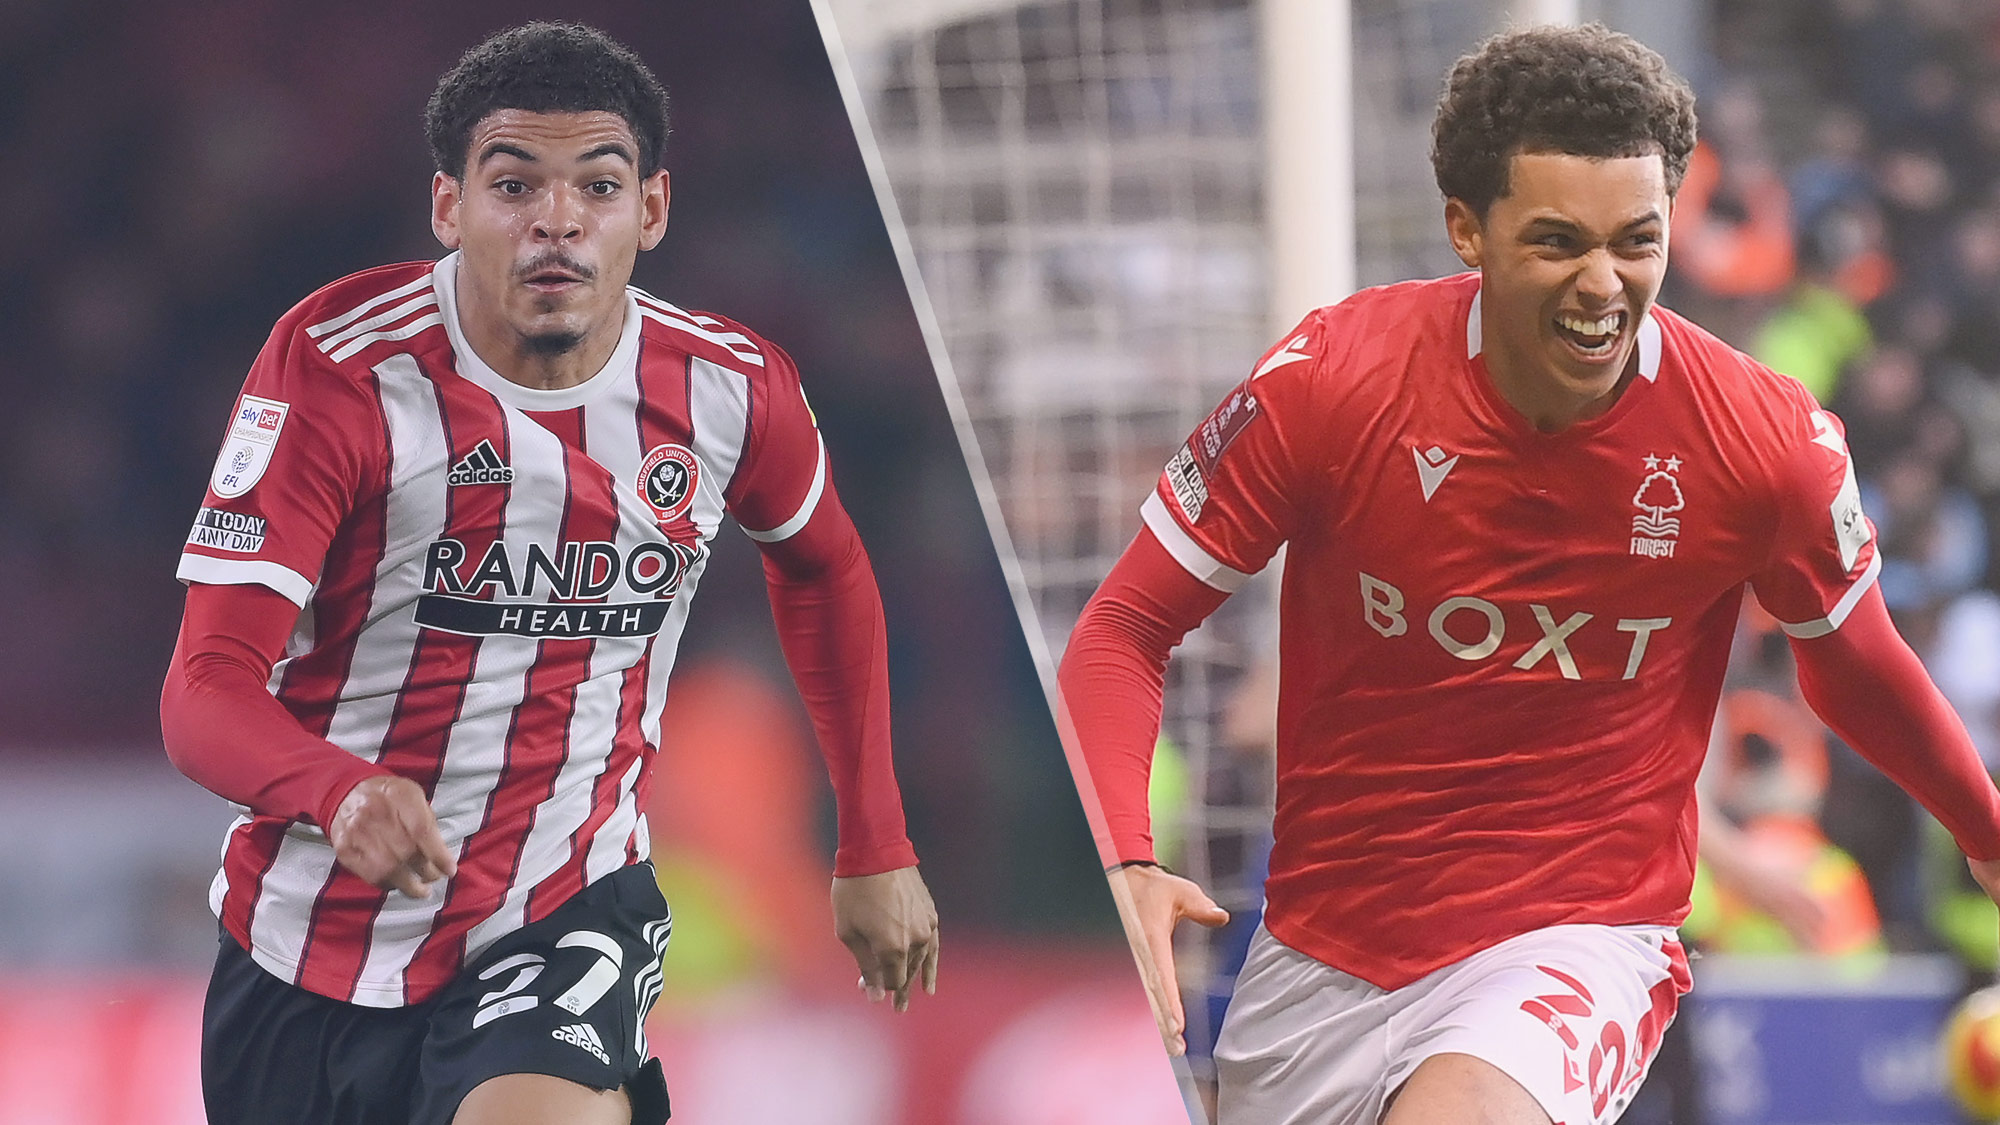 Morgan Gibbs-White of Sheffield United and Brennan Johnson of Nottingham Forest could both feature in the Sheffield United vs Nottingham Forest live stream